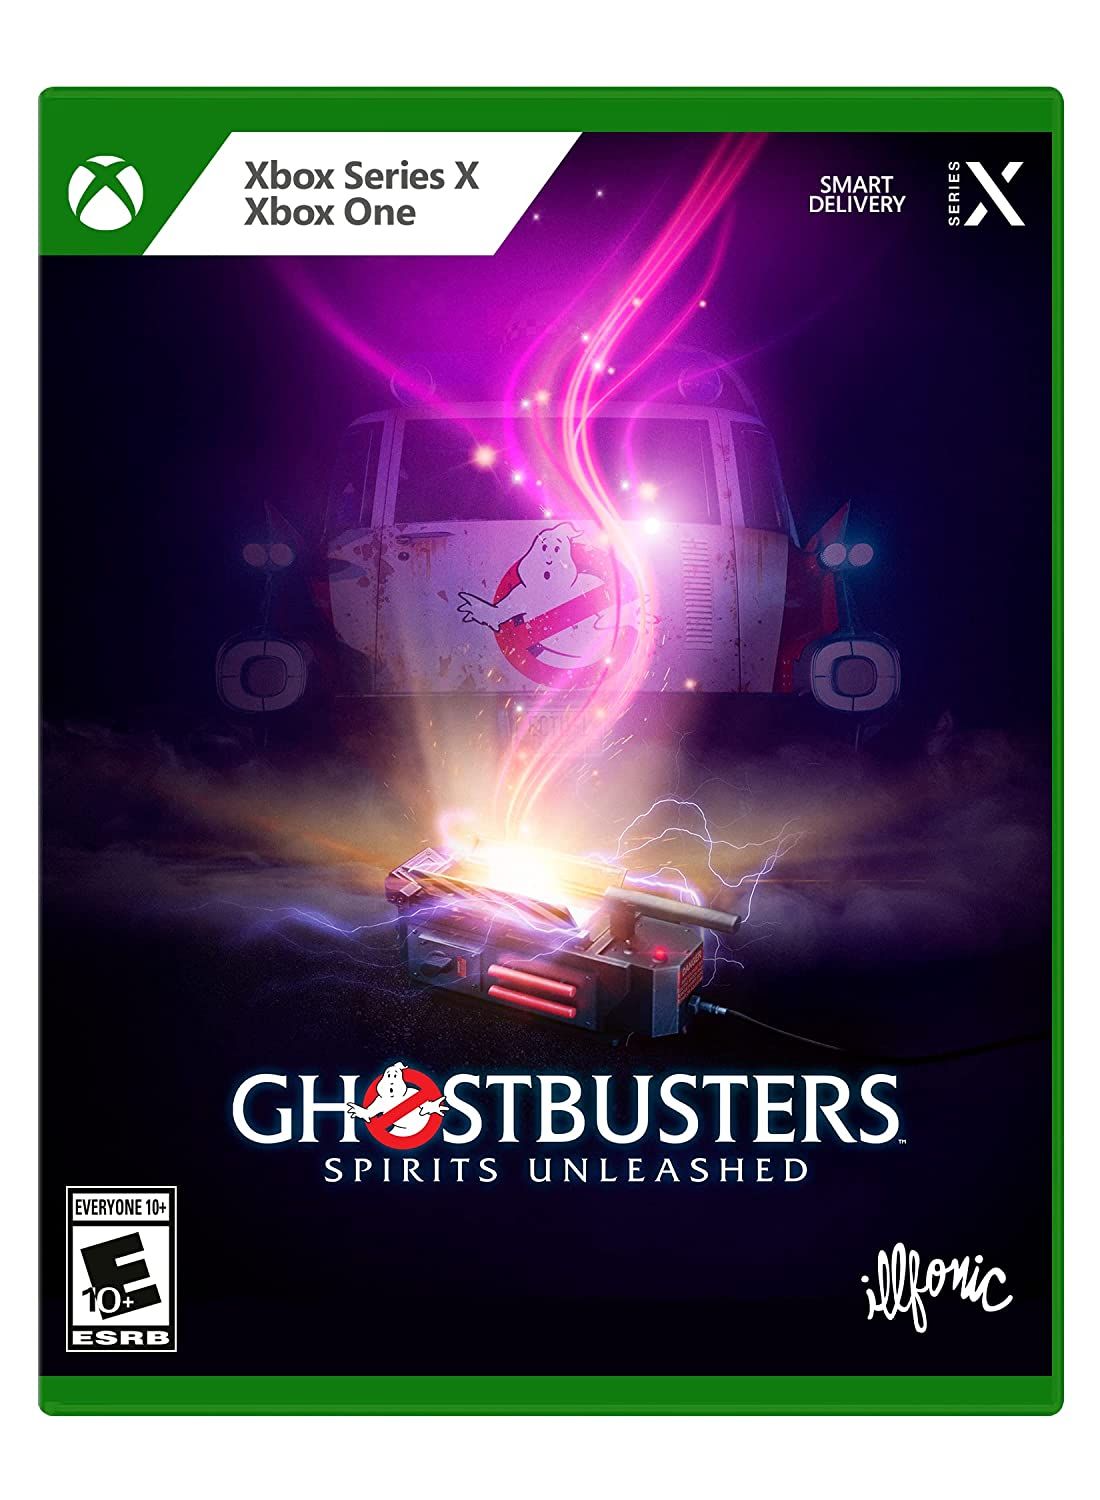 Ghostbusters Spirits Unleashed xbox case